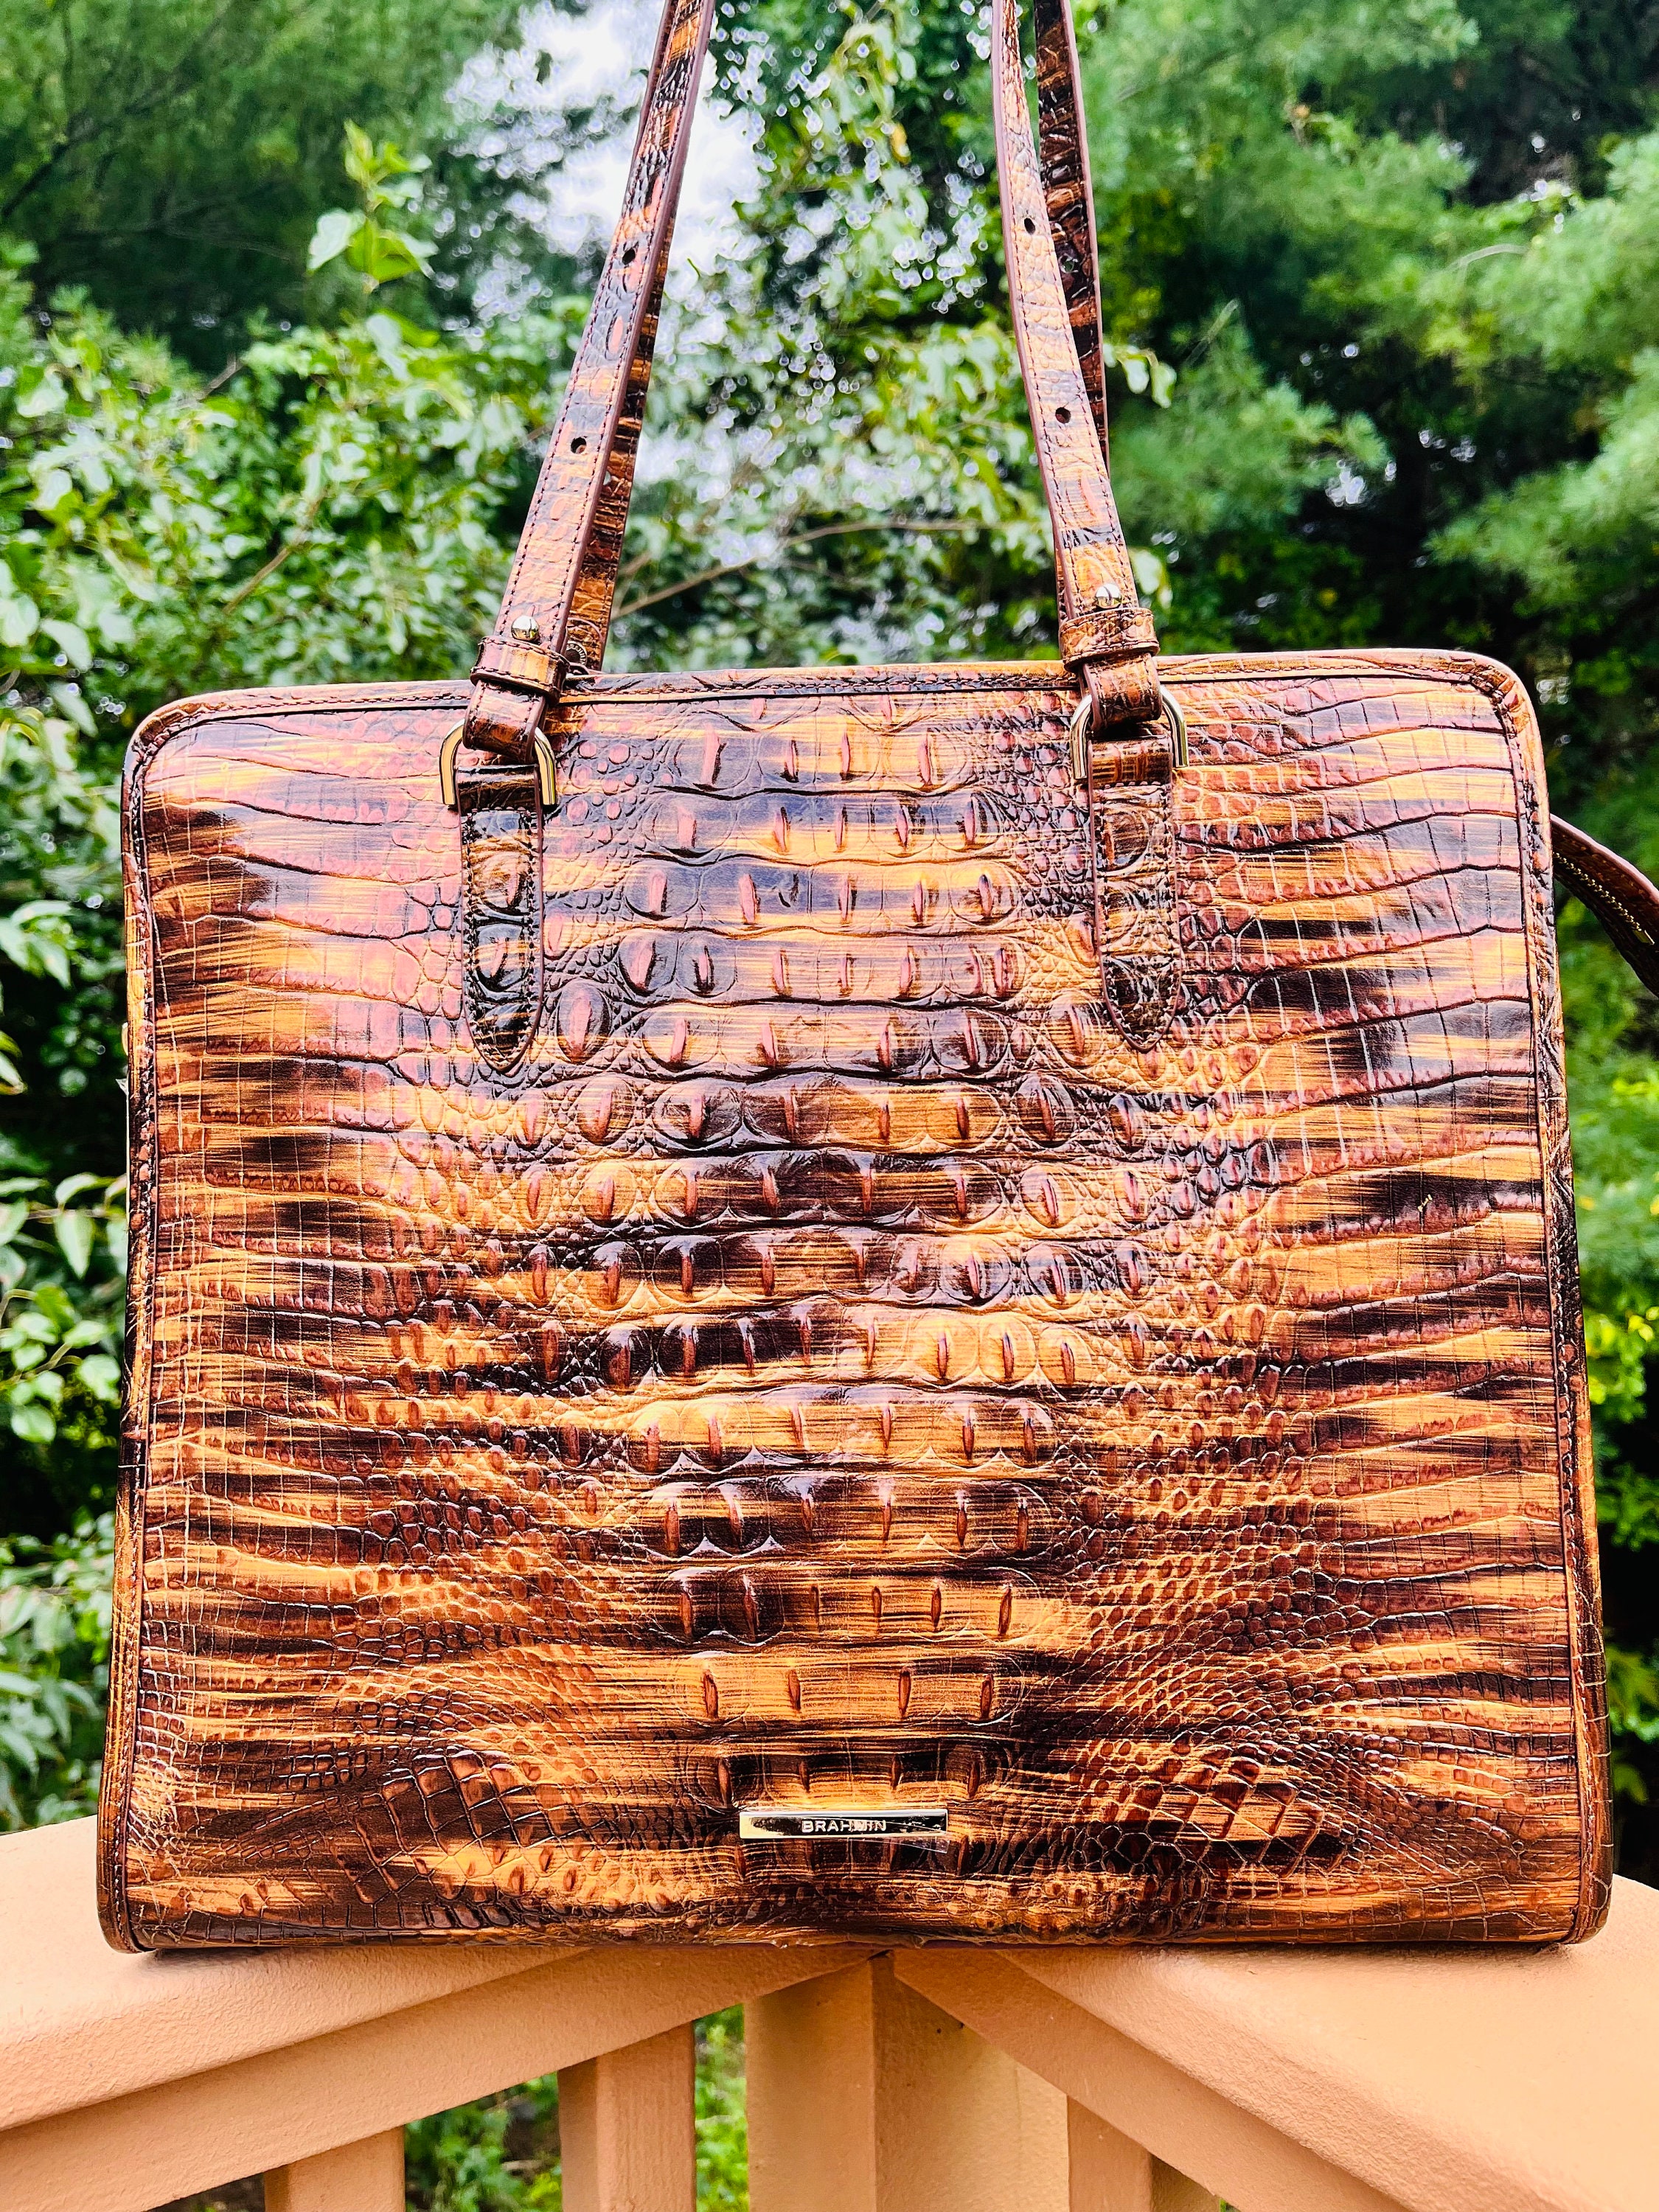 Is This Real Crocodile Leather? Brahmin Leather Bag Review 